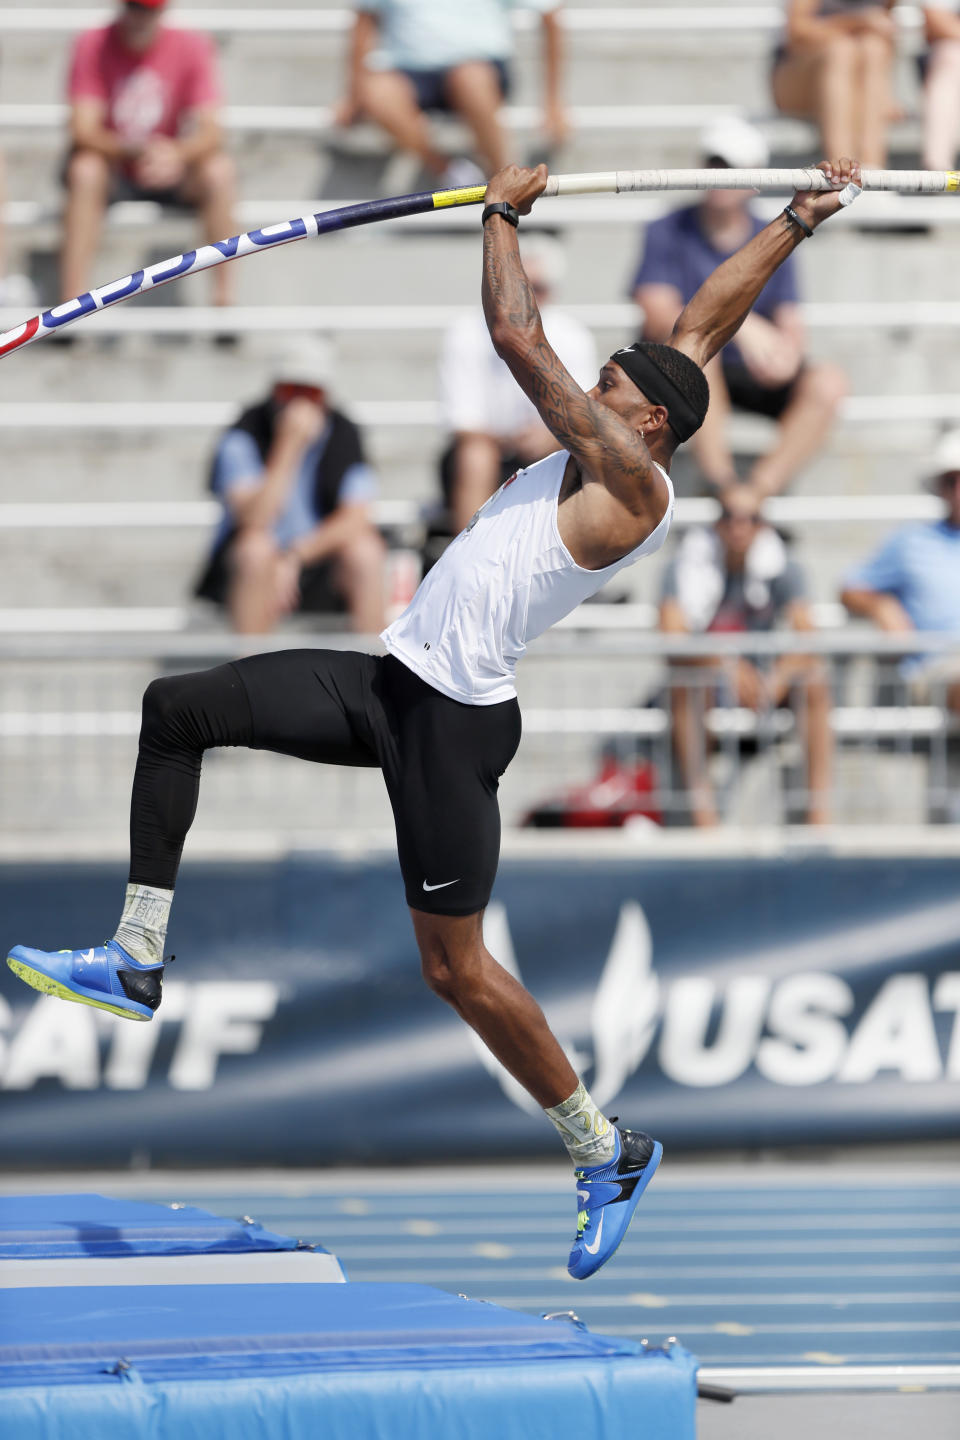 Devon Williams competes during the decathlon pole vault at the U.S. Championships athletics meet, Friday, July 26, 2019, in Des Moines, Iowa. (AP Photo/Charlie Neibergall)